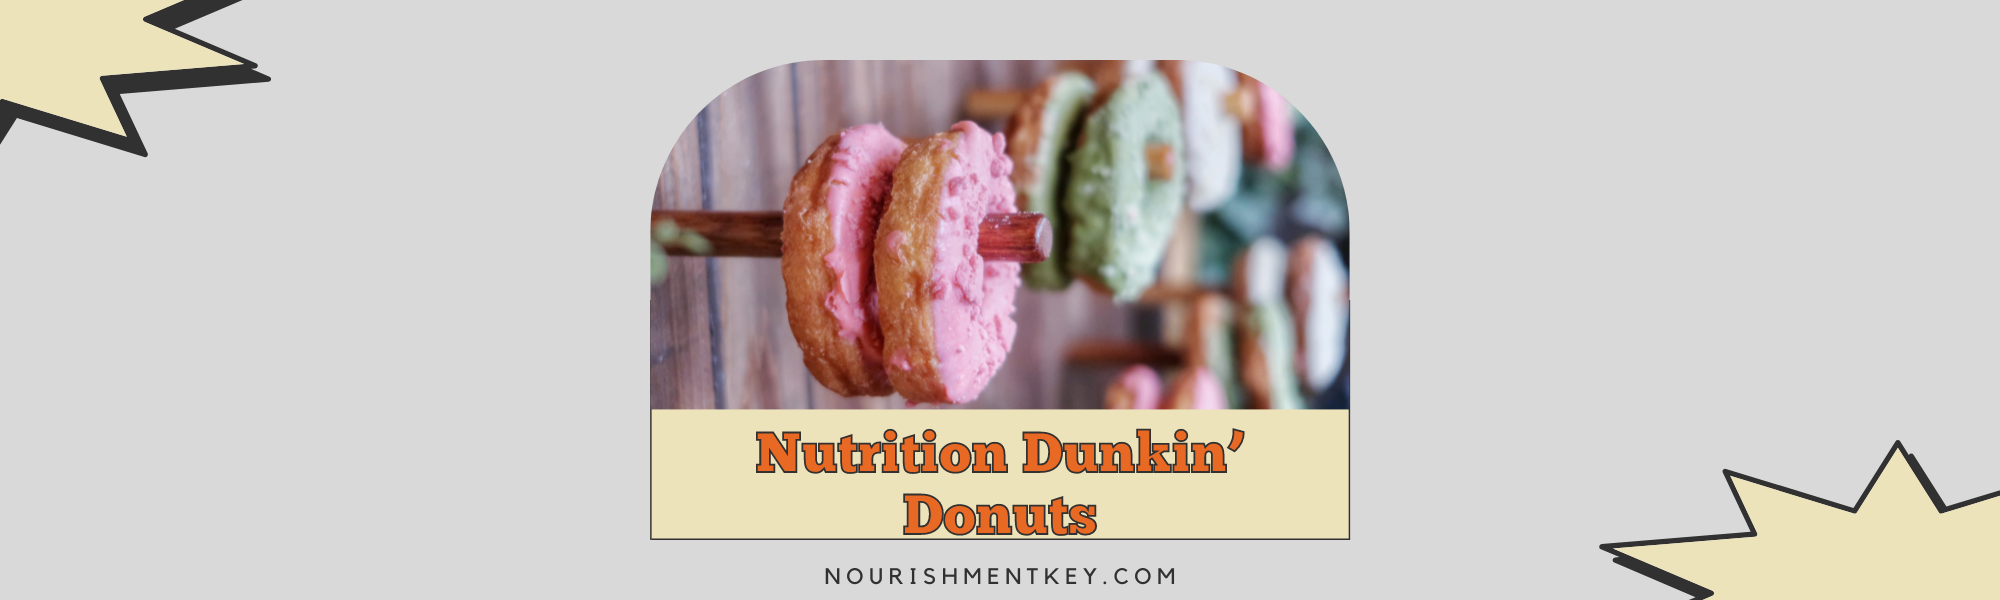 Nutrition Dunkin’ Donuts Facts & More Information